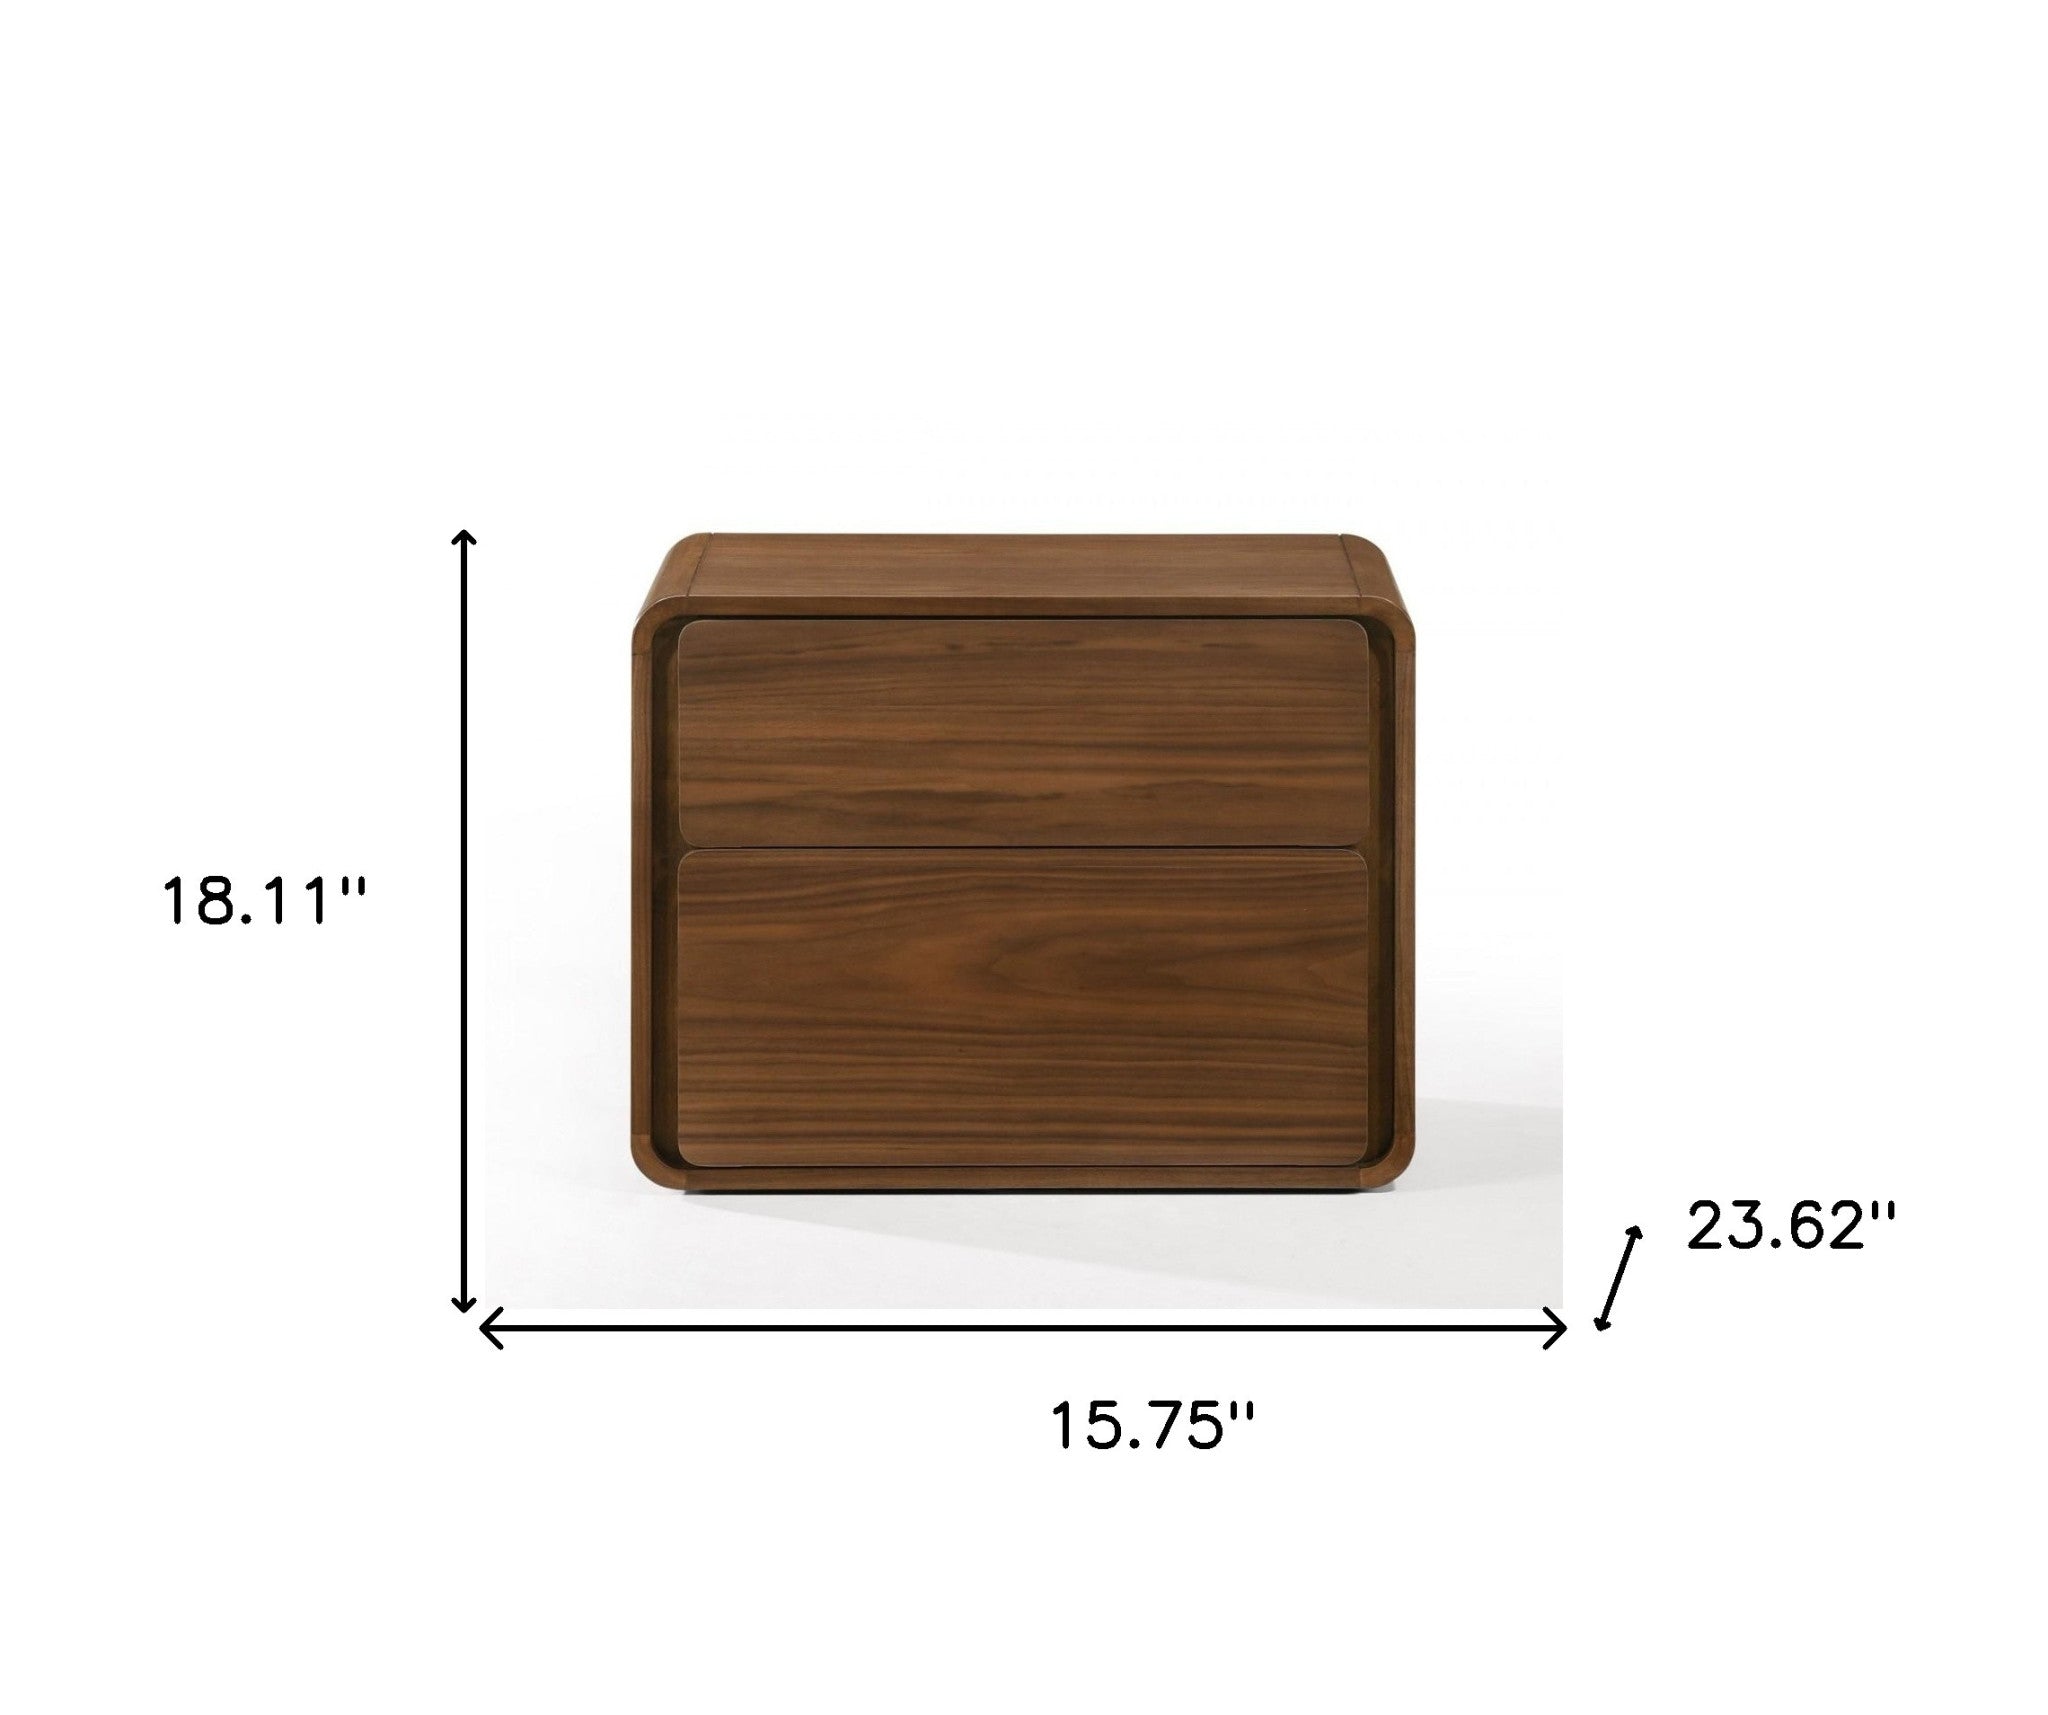 Modern Walnut Brown Nightstand with Two Drawers